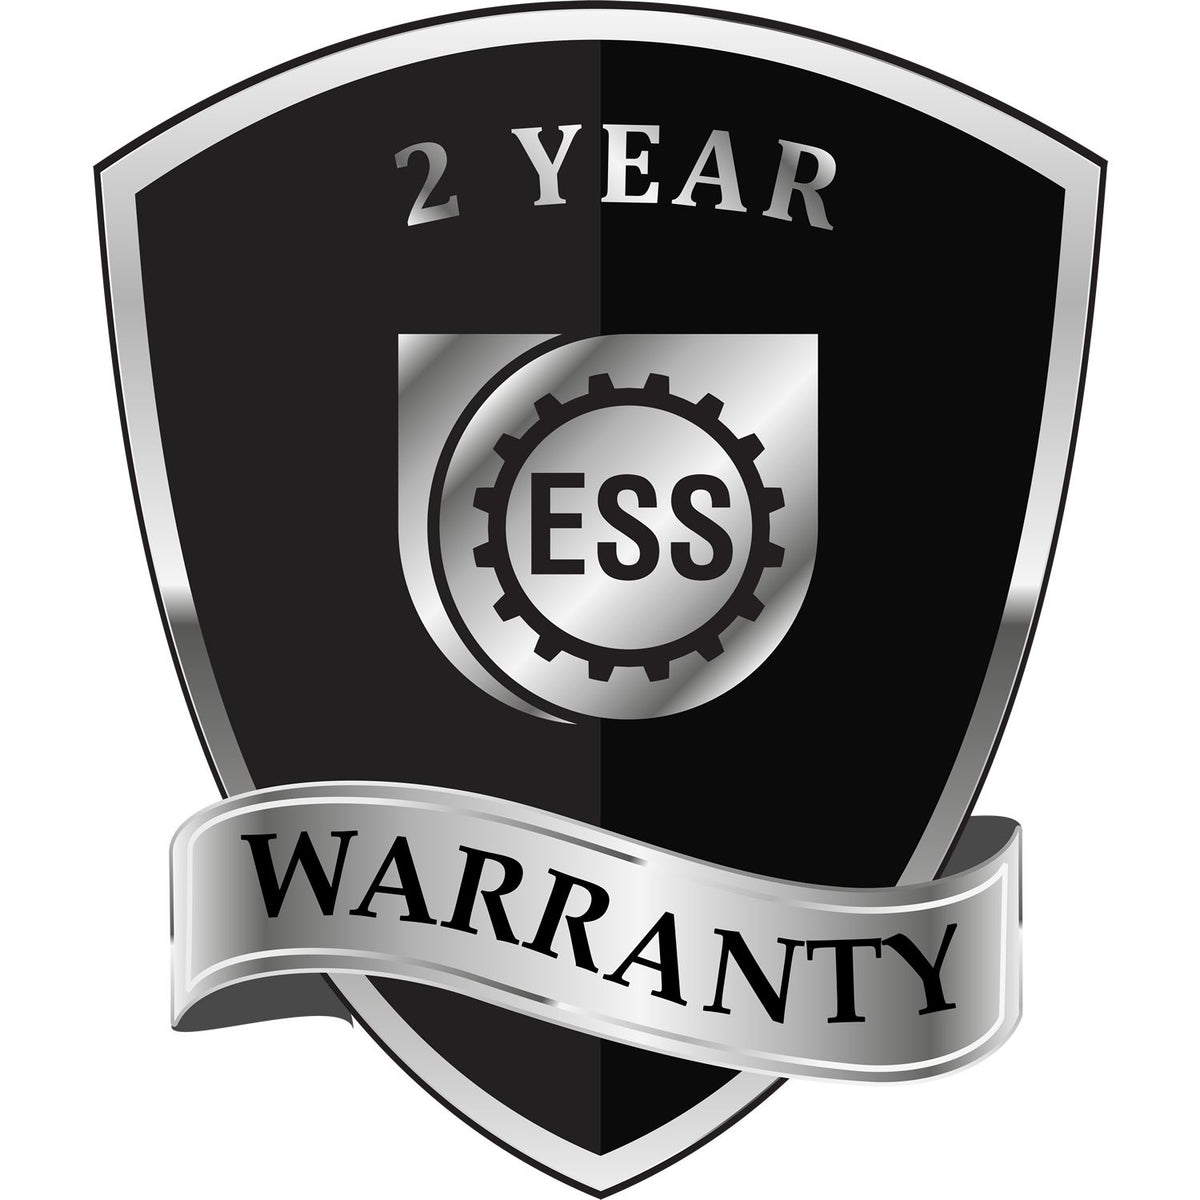 A badge or emblem showing a warranty icon for the Long Reach Louisiana PE Seal